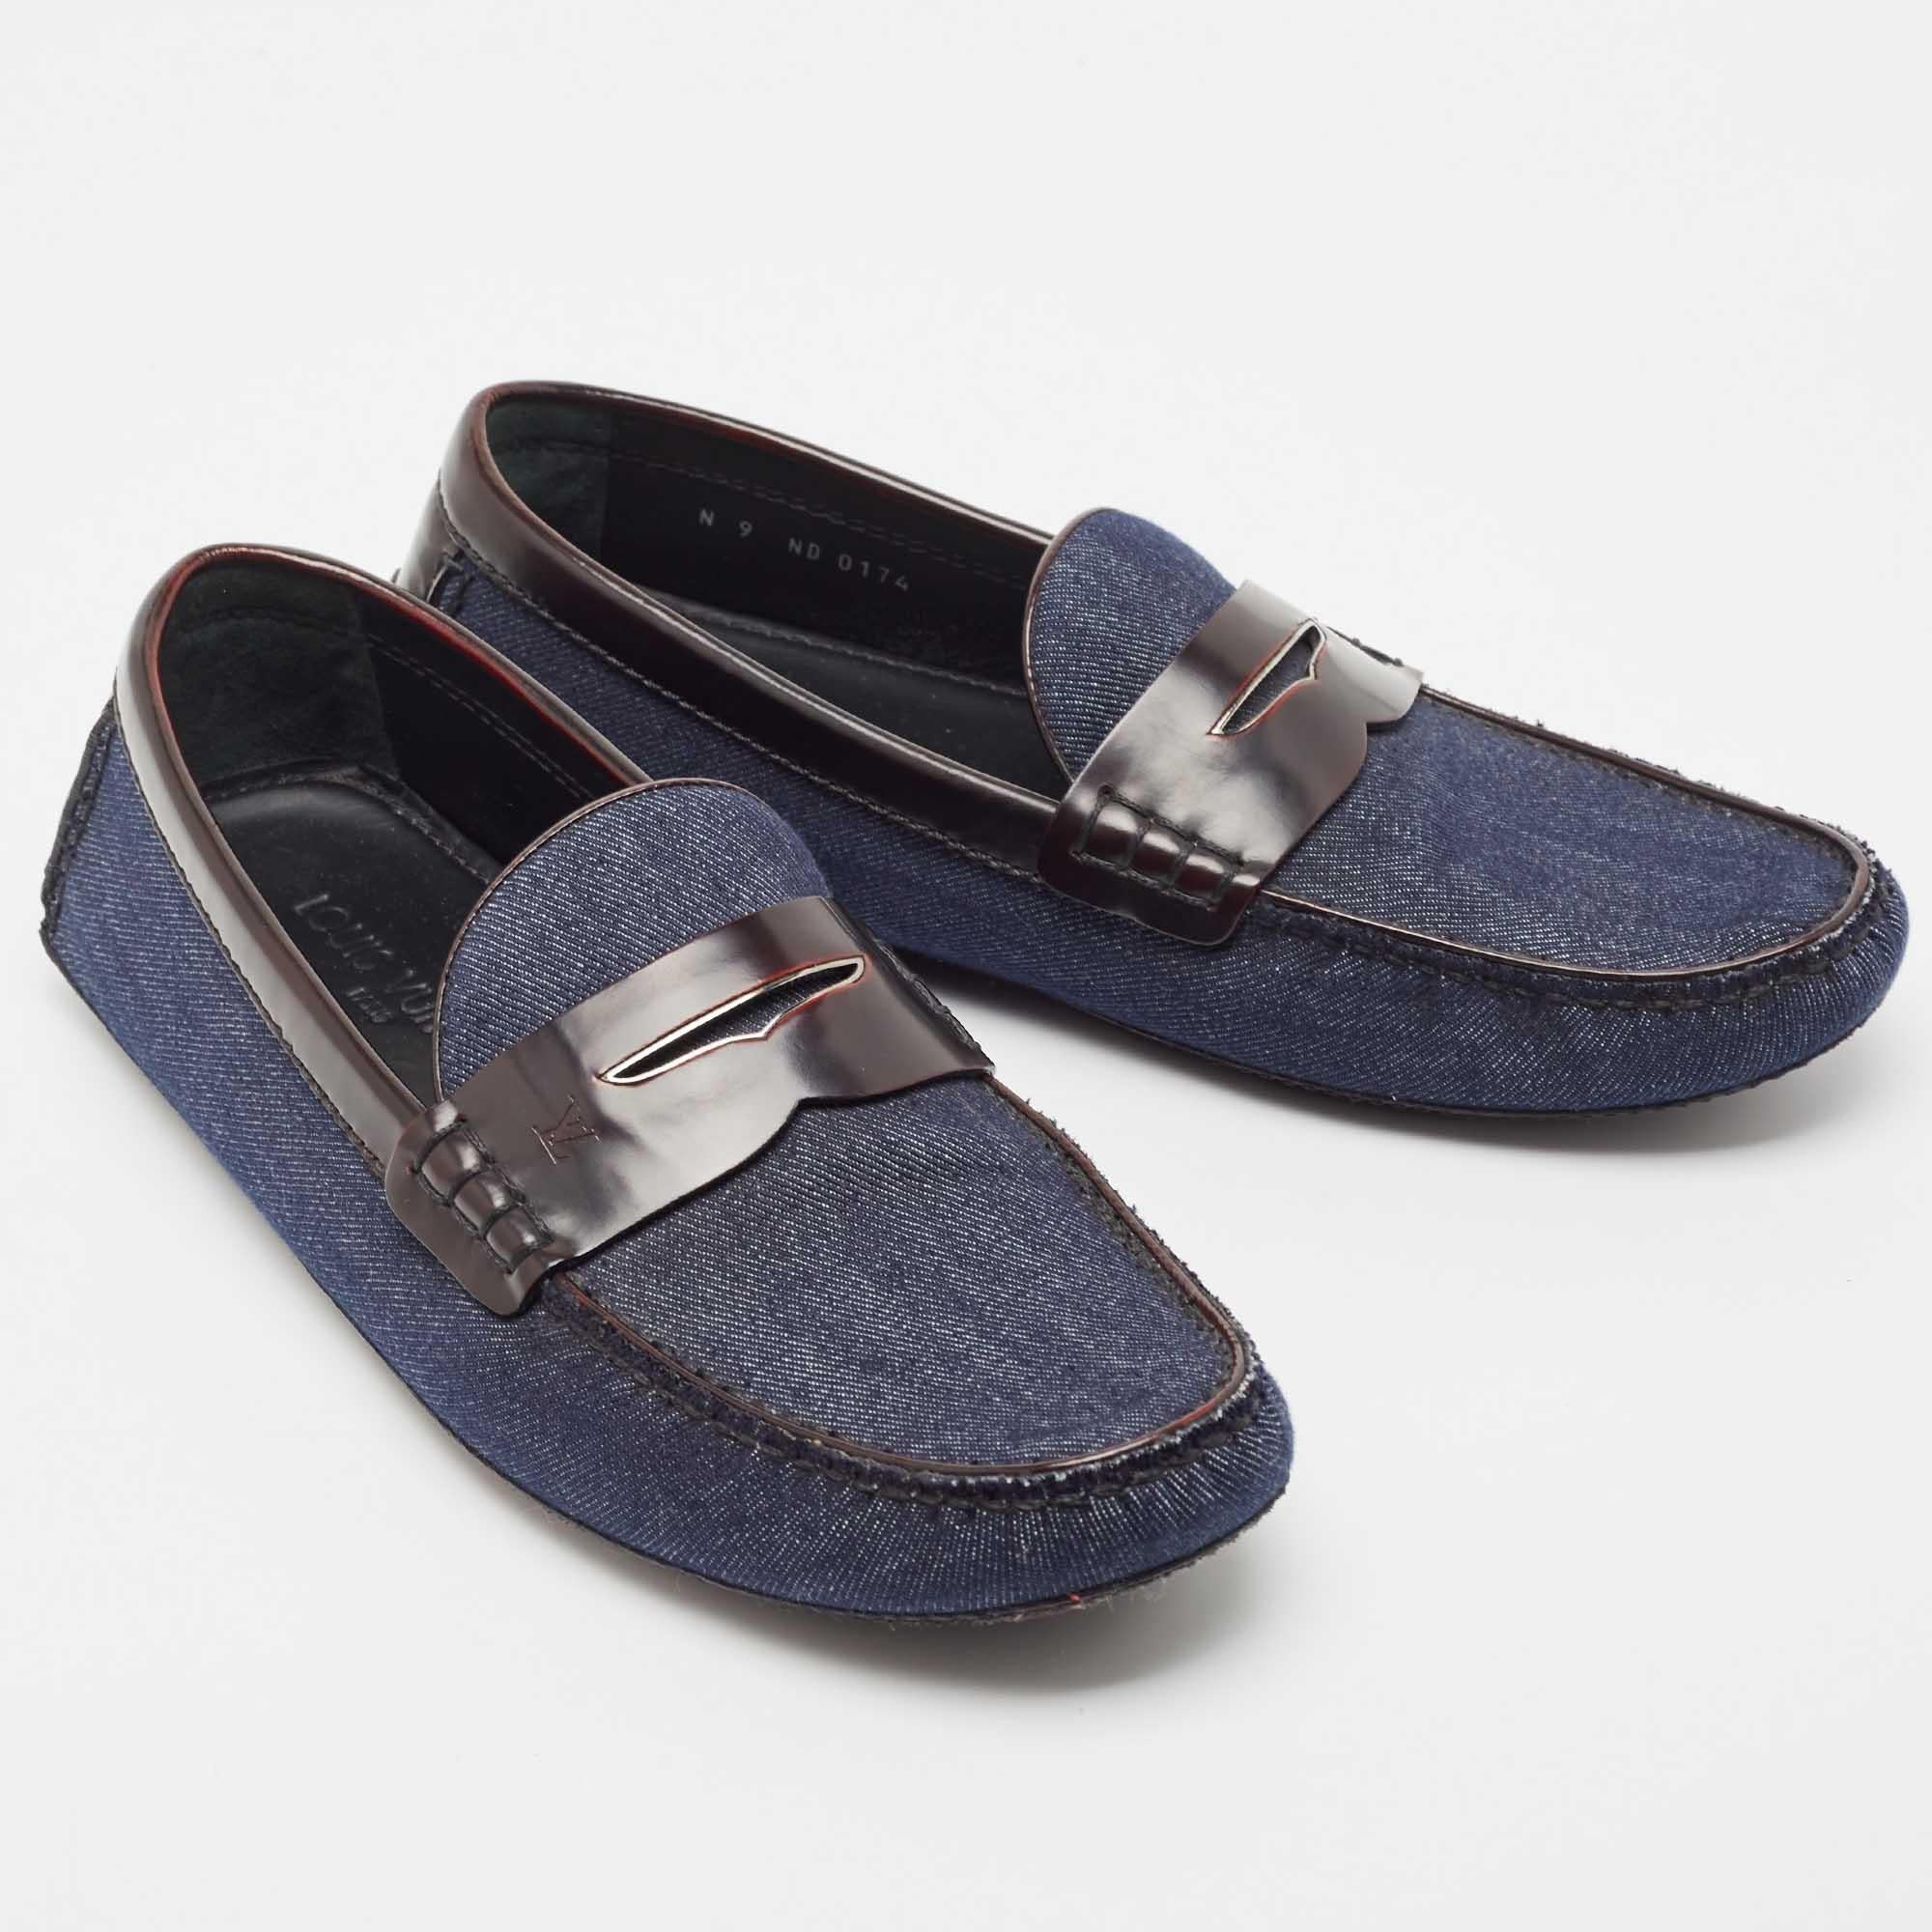 Louis Vuitton Blue Denim And Brown Leather Penny Loafers Size 43 In Good Condition For Sale In Dubai, Al Qouz 2